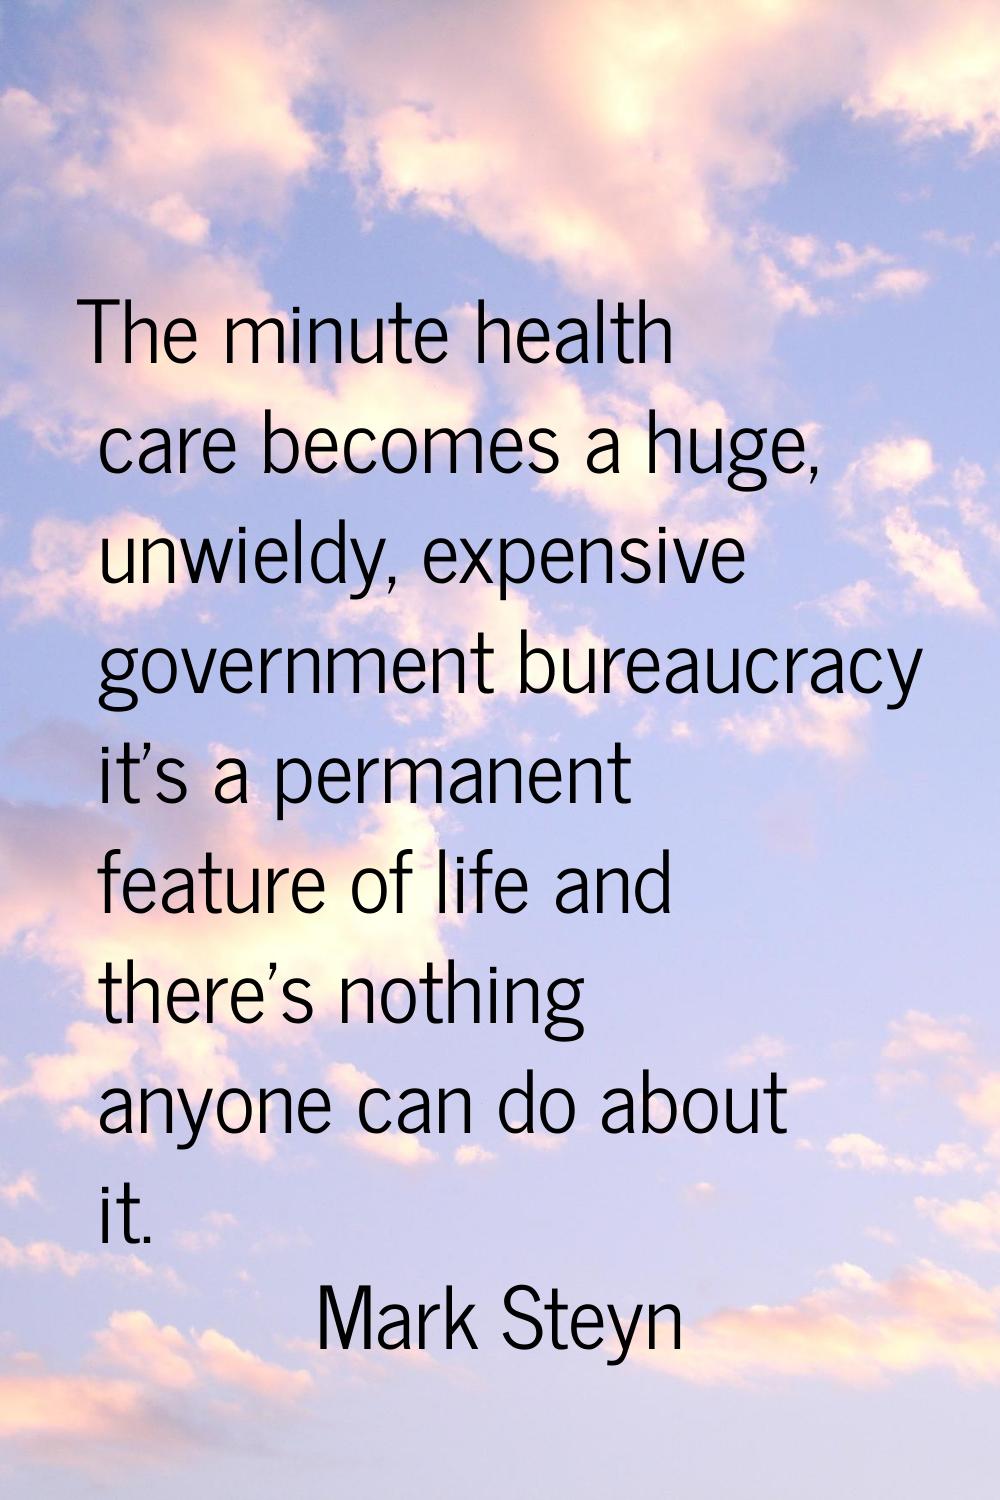 The minute health care becomes a huge, unwieldy, expensive government bureaucracy it's a permanent 